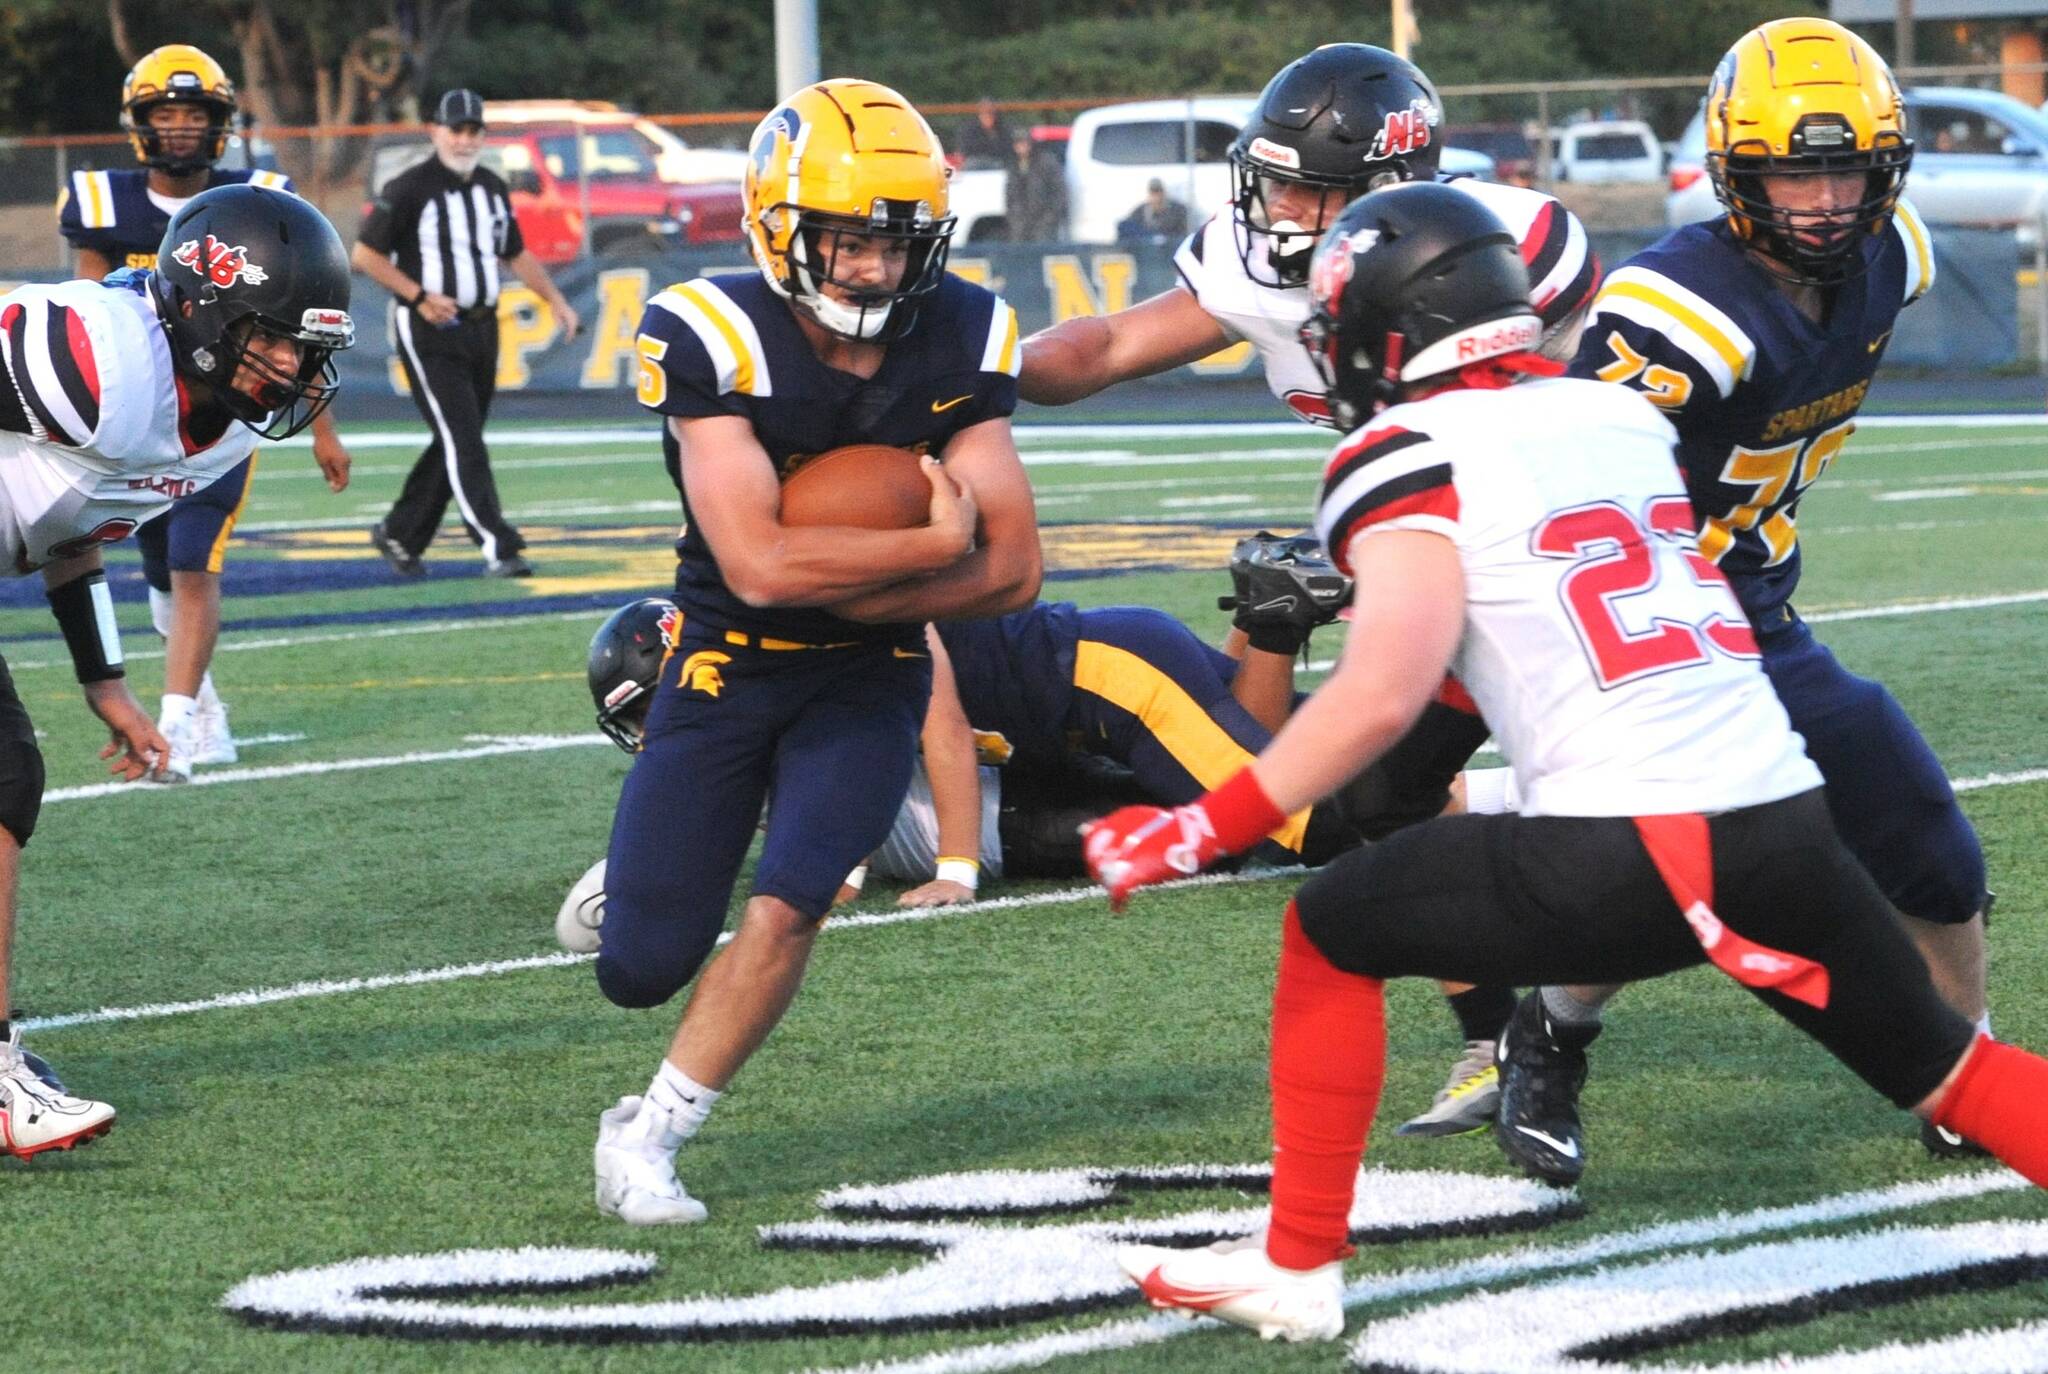 Forks' Landin Davis (5) runs through a host of Red Devils as he faces Neah Bay's JQ Johnson (23). Also in the action is Forks' Jeremy Hutto (72). (Lonnie Archibald/for Peninsula Daily News)